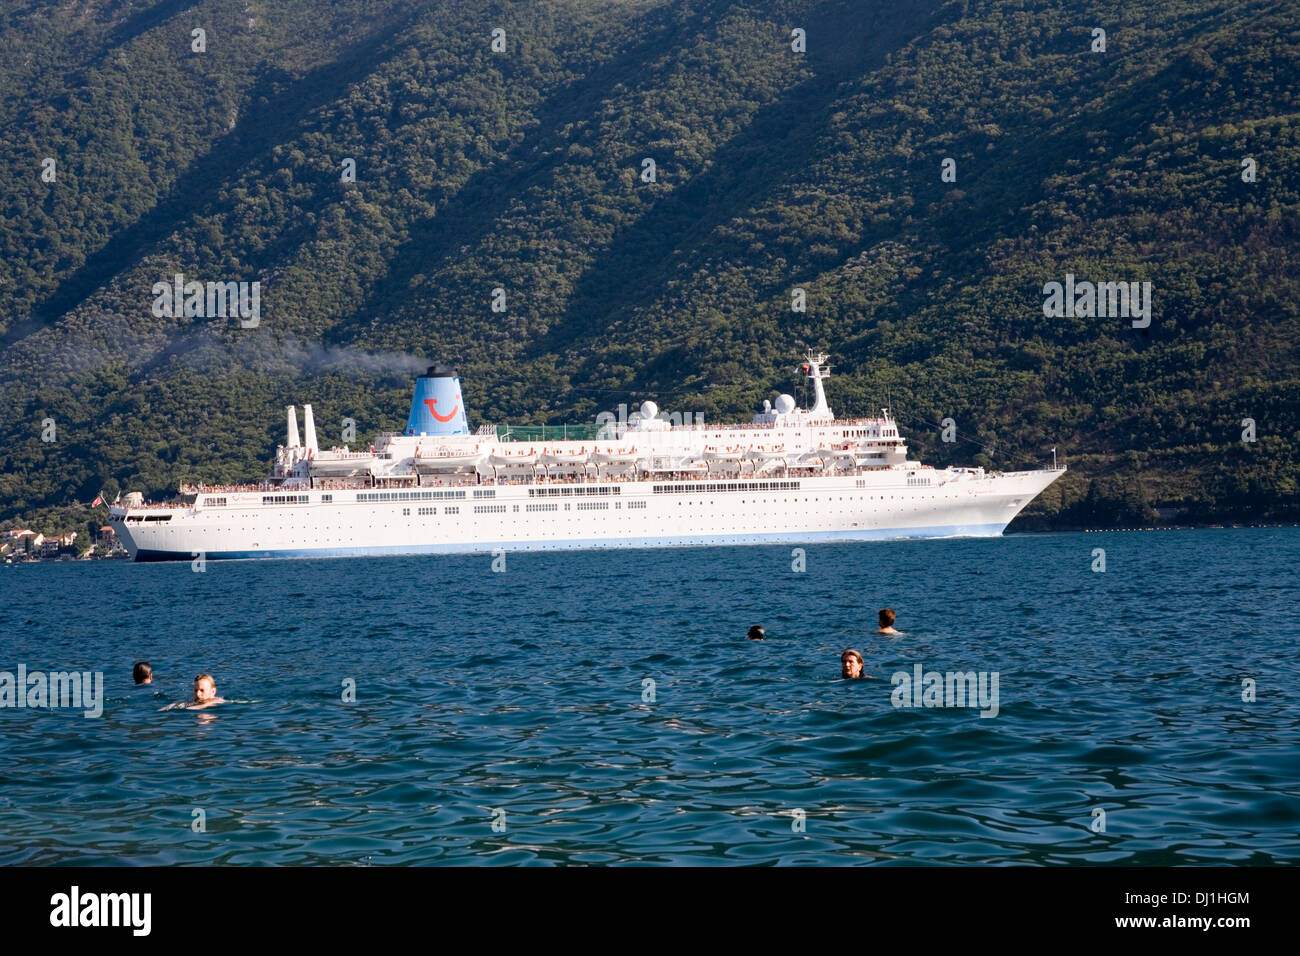 Thomson cruise liner ship leaving Bay of Kotor with people swimmimg in sea Stock Photo